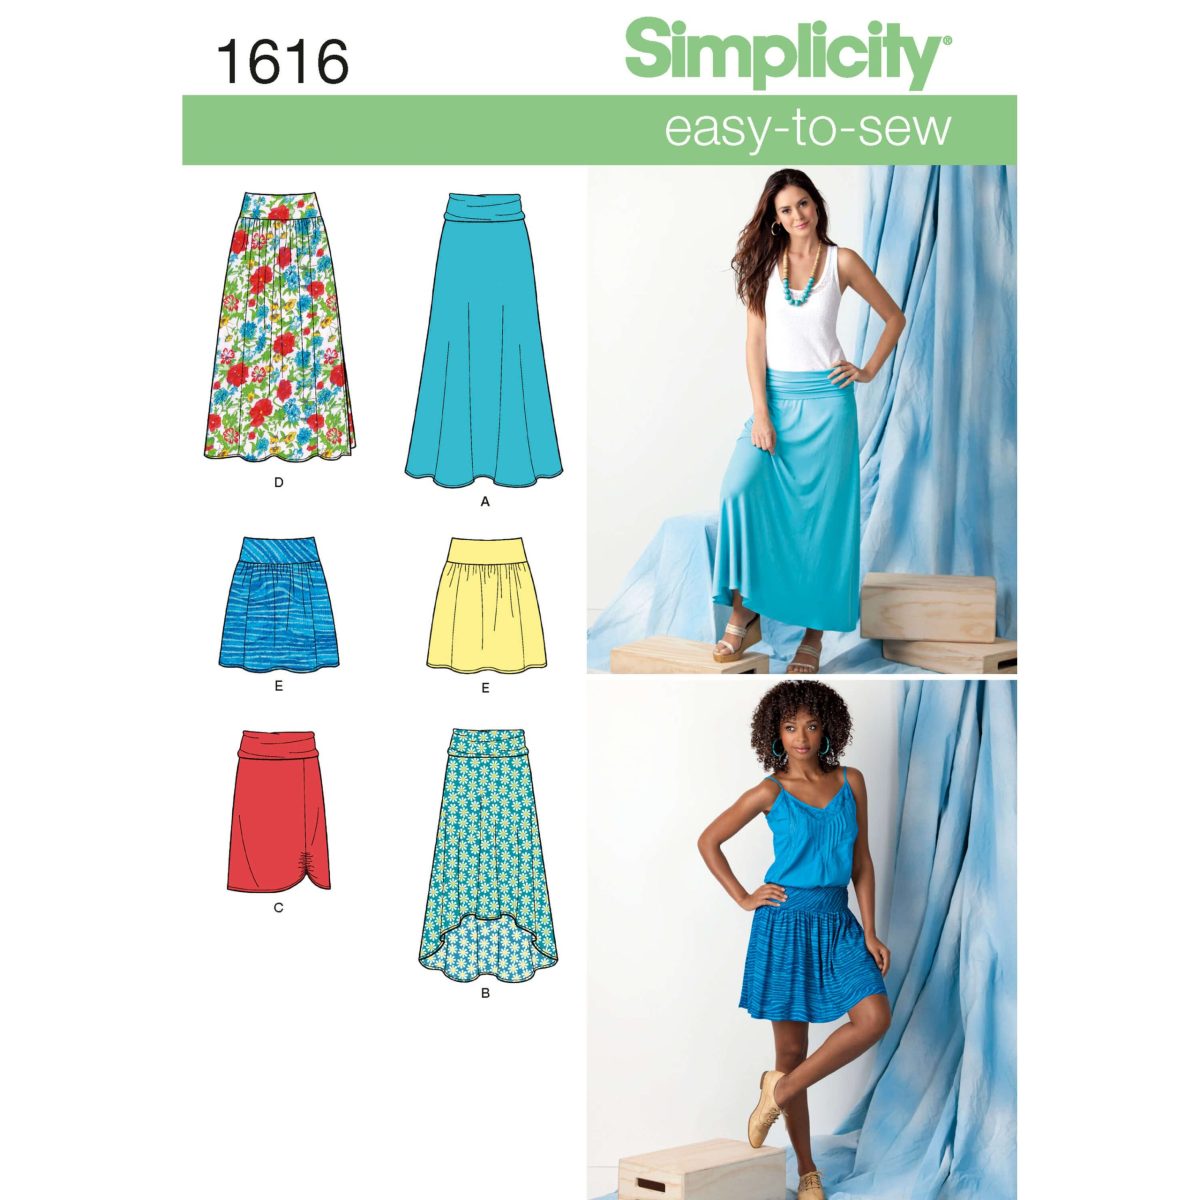 Simplicity Sewing Pattern 1616 Misses' Knit or Woven Skirts